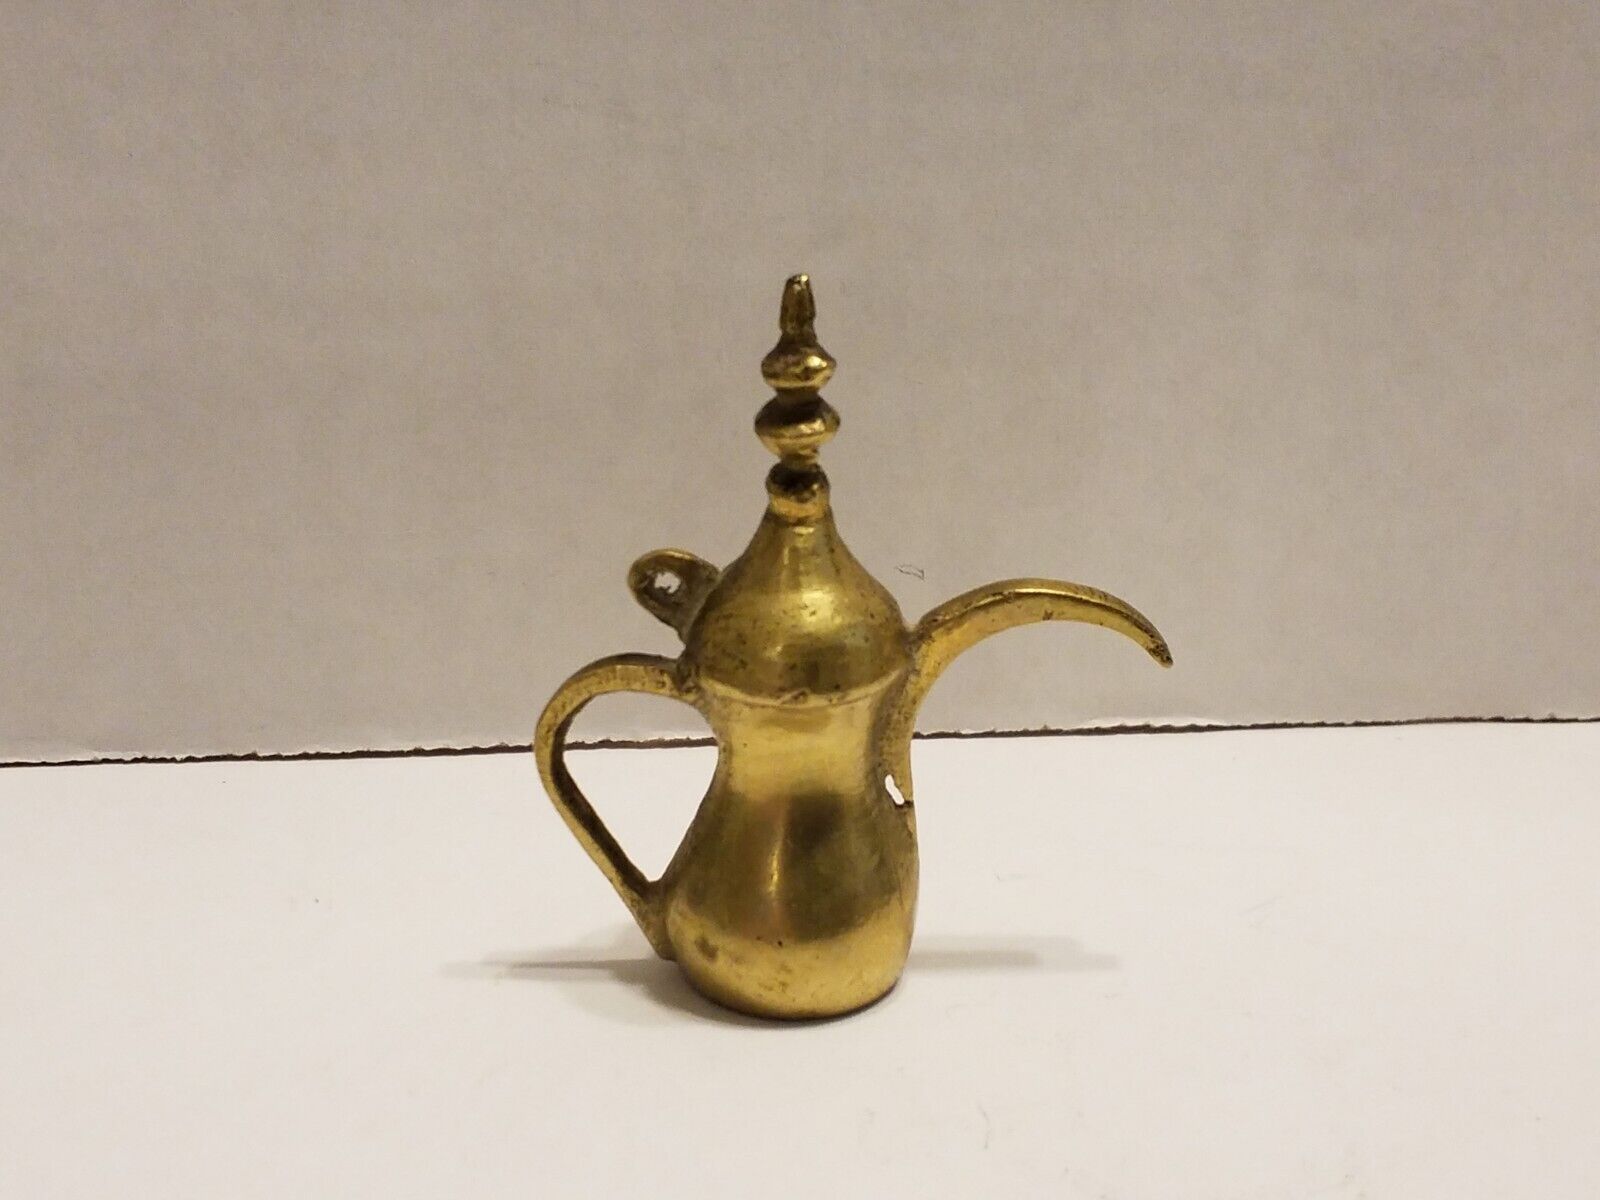 Vintage Miniature Aftaba Water Pitcher Ewer. Hole Use As Pendant Or Hang Display